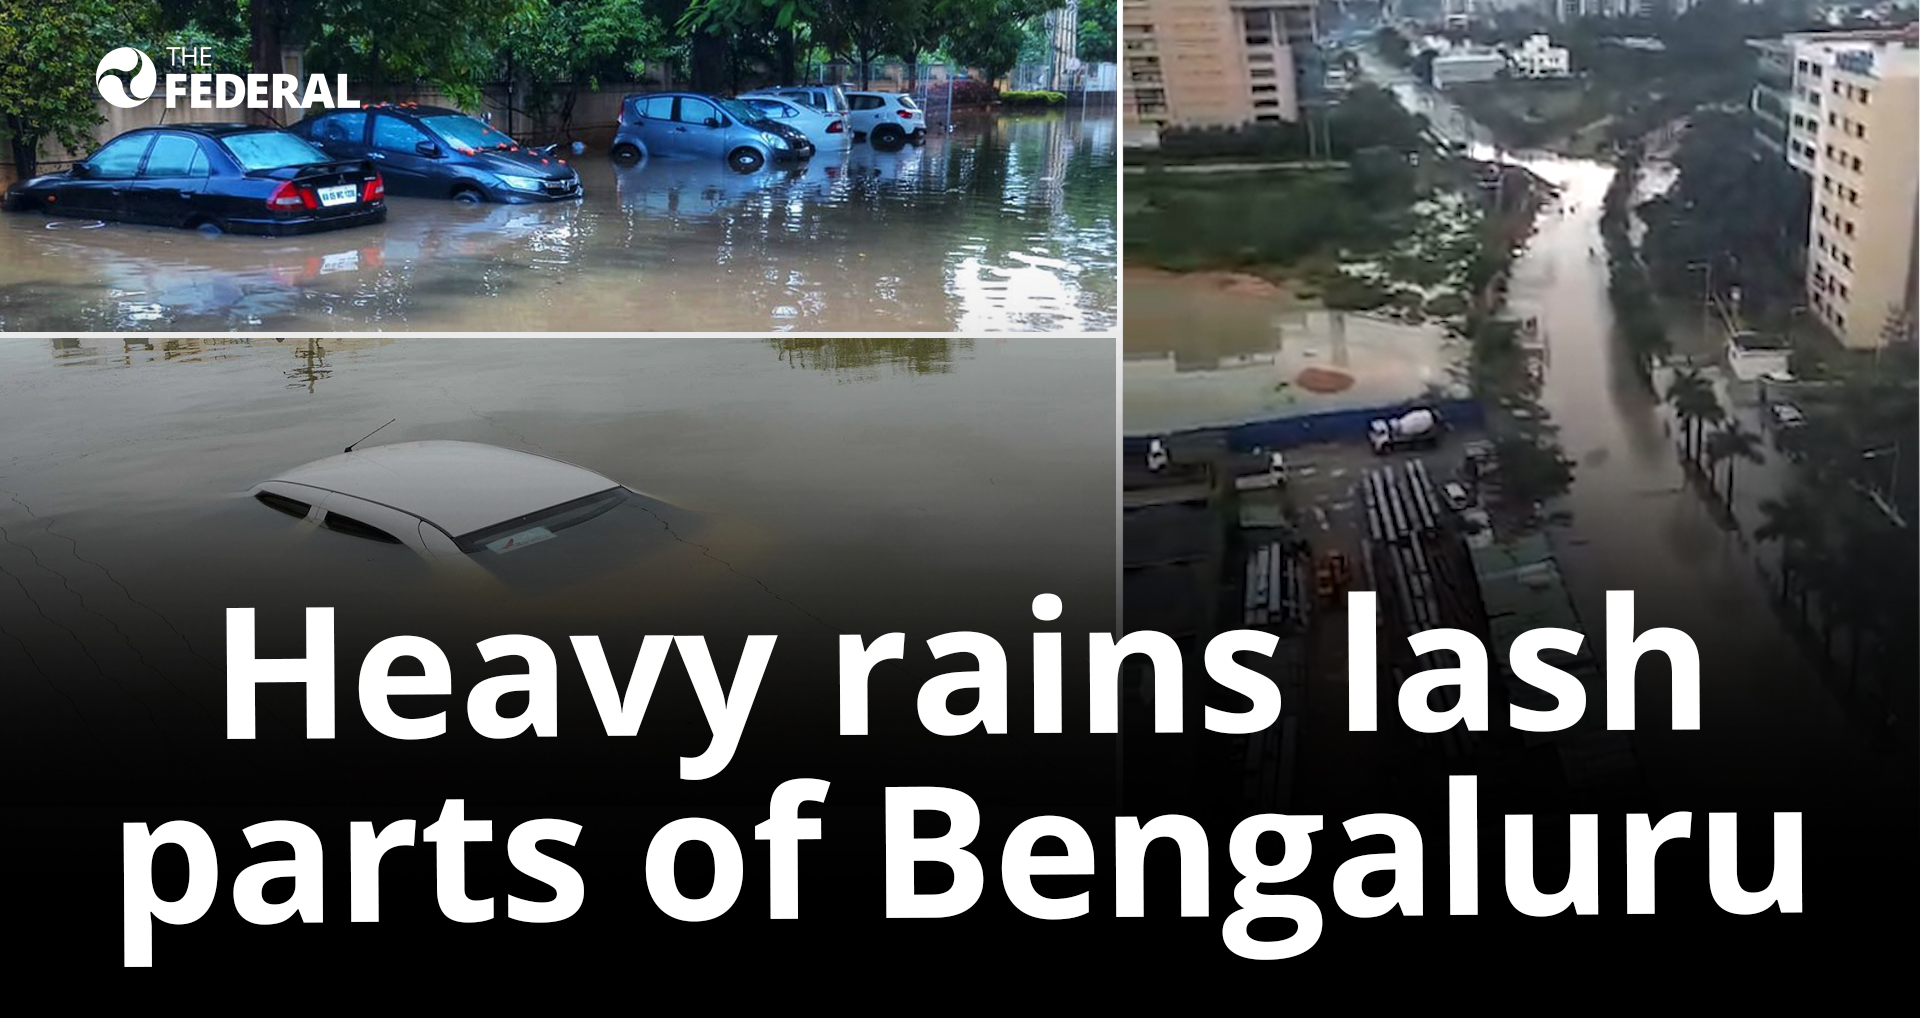 Heavy rains leave Bengaluru flooded, angry citizens question govts preparedness